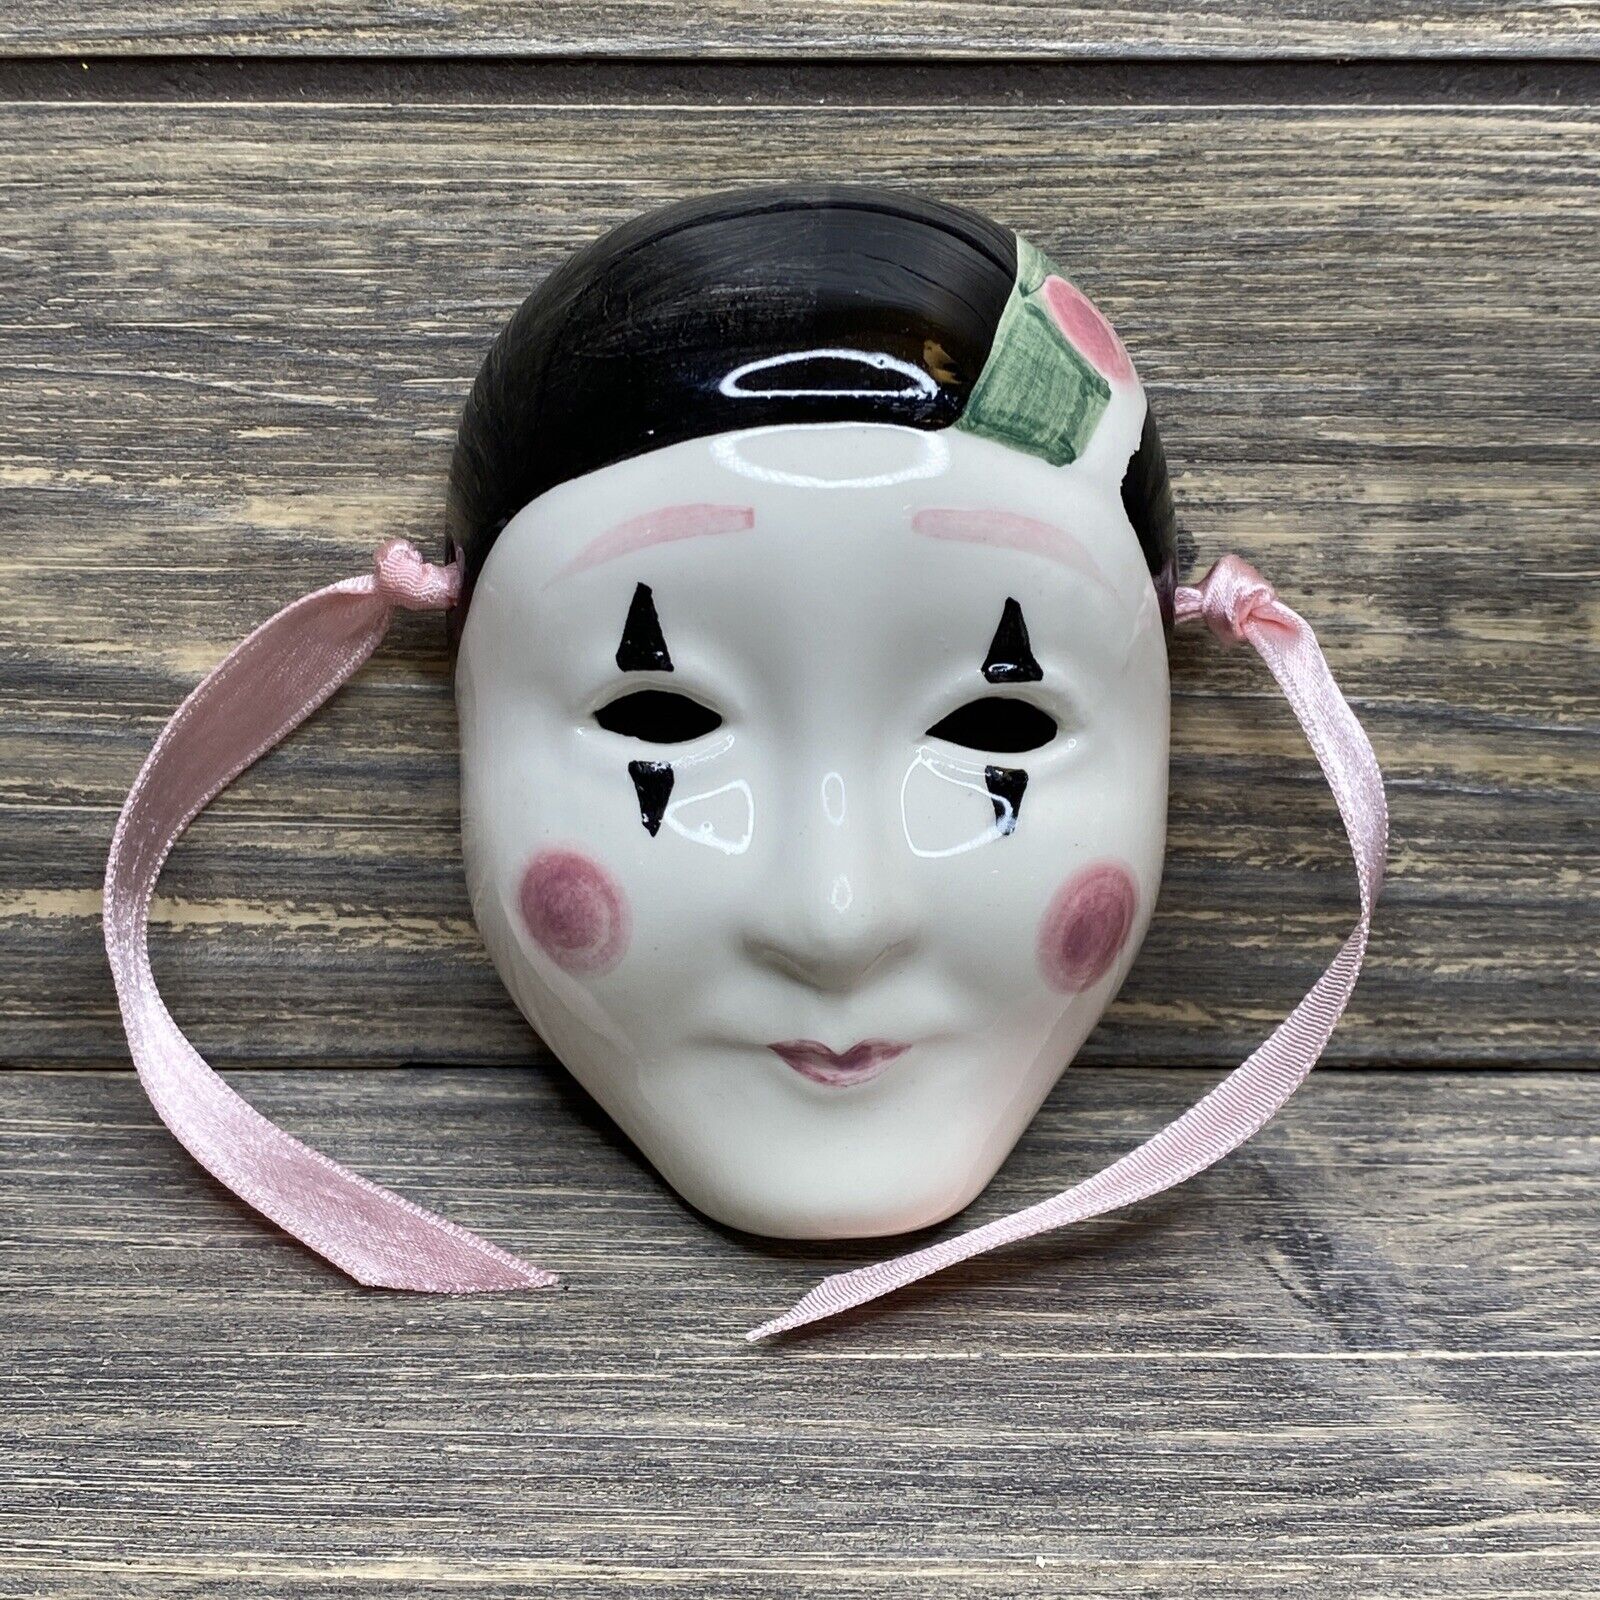 Vintage Crowning Touch Collection Ceramic Japanese Theatre Mask 3.5” 